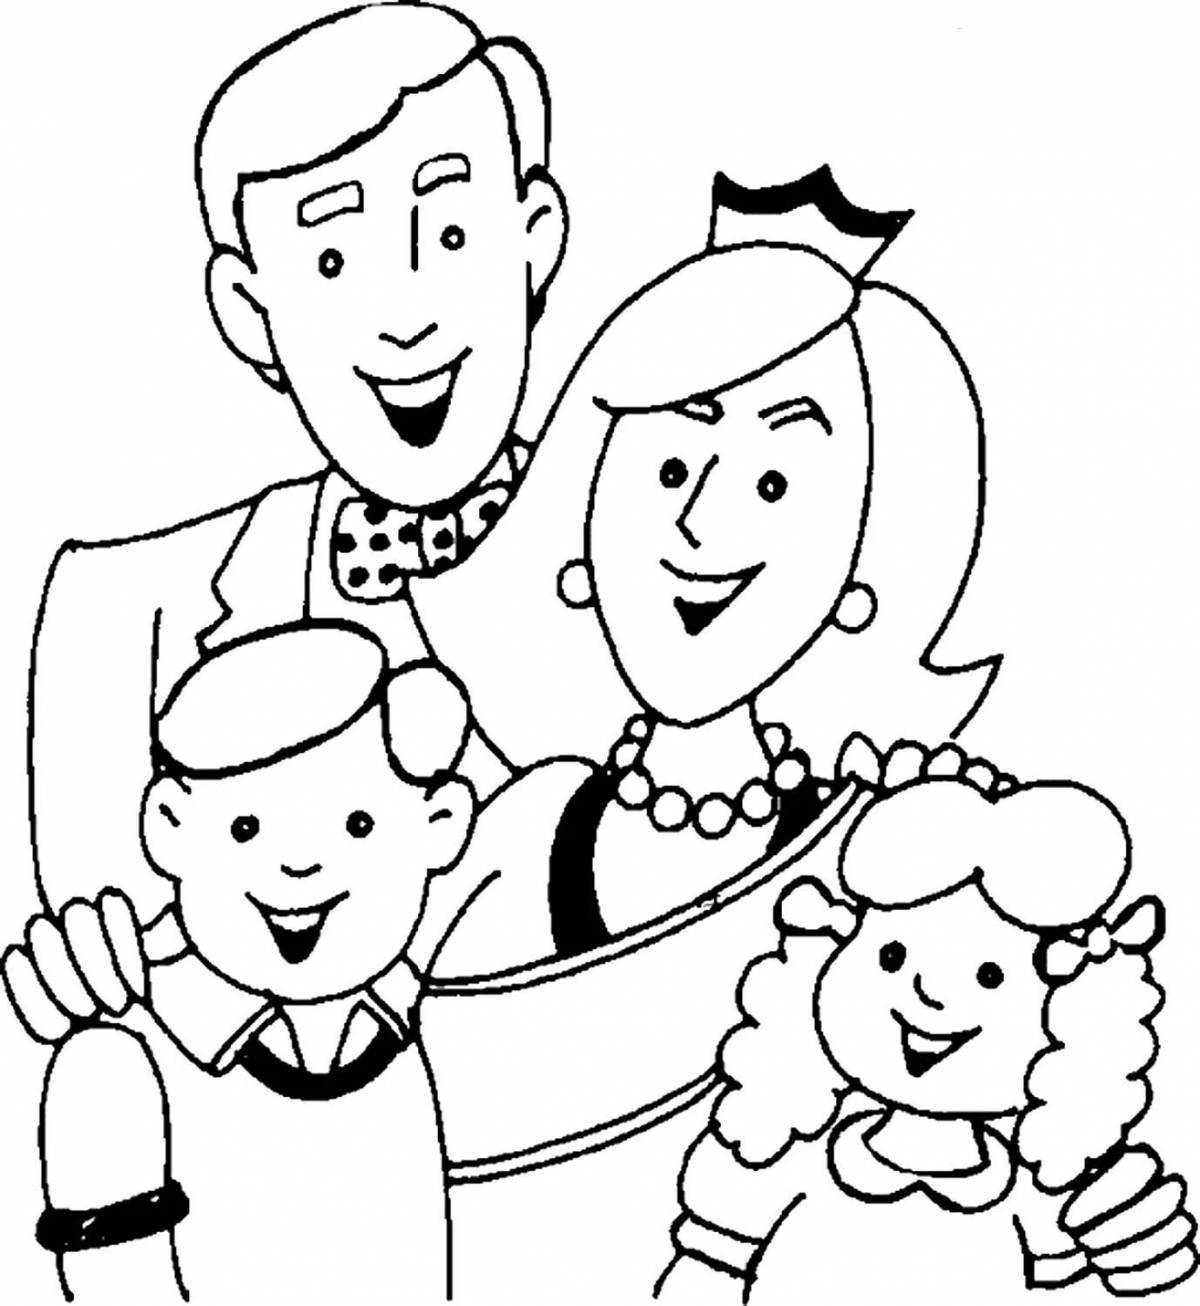 Innovative family coloring book for 7 year olds